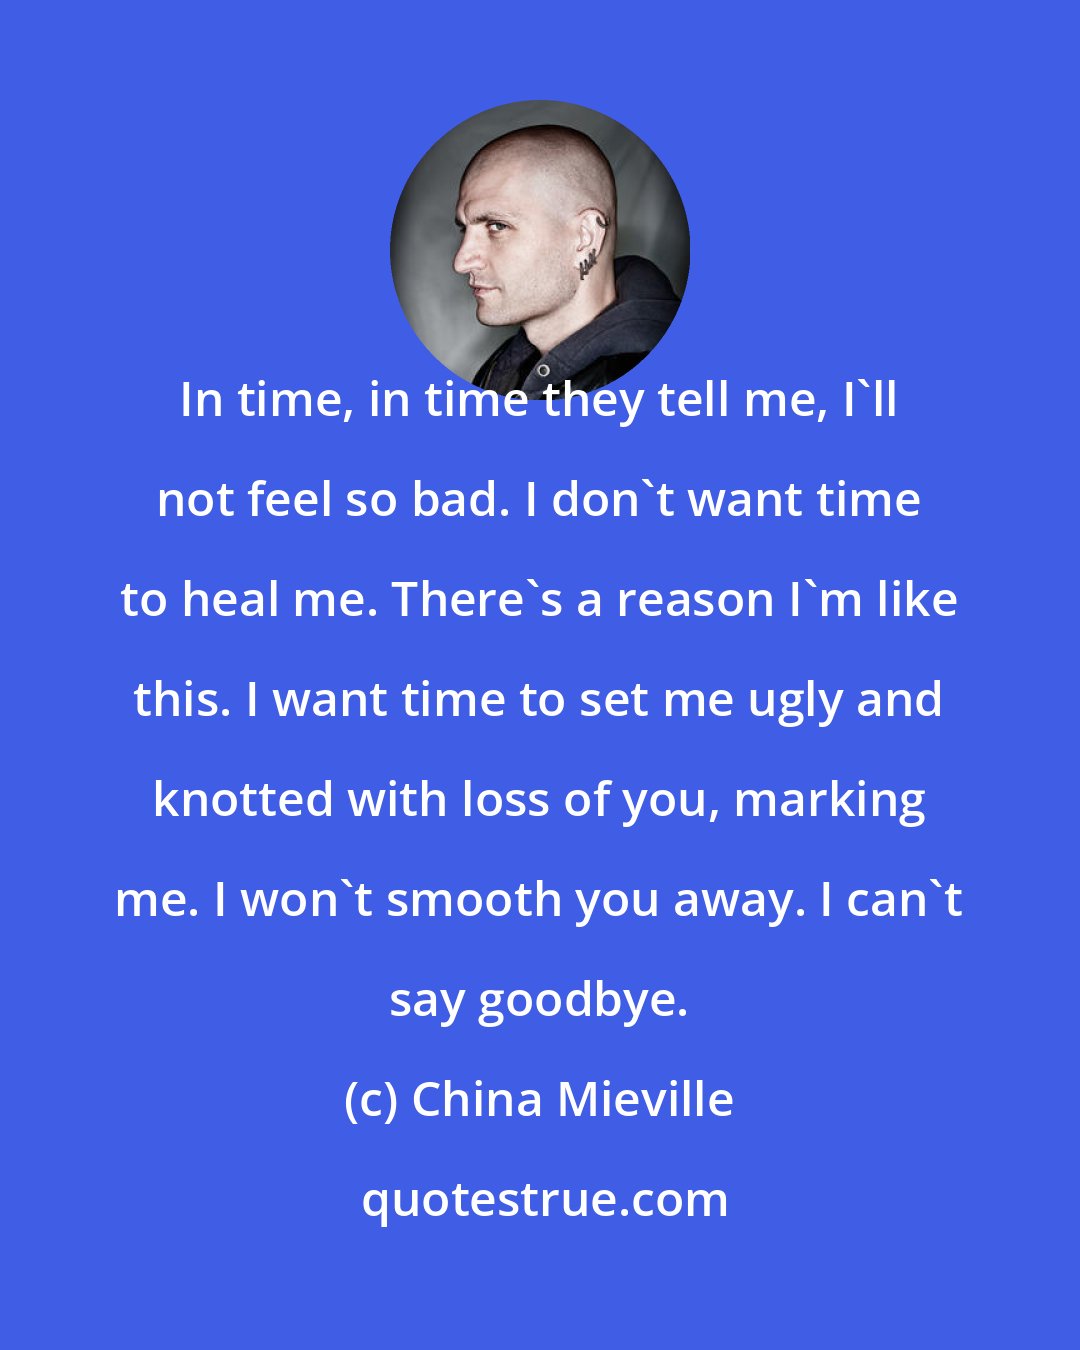 China Mieville: In time, in time they tell me, I'll not feel so bad. I don't want time to heal me. There's a reason I'm like this. I want time to set me ugly and knotted with loss of you, marking me. I won't smooth you away. I can't say goodbye.